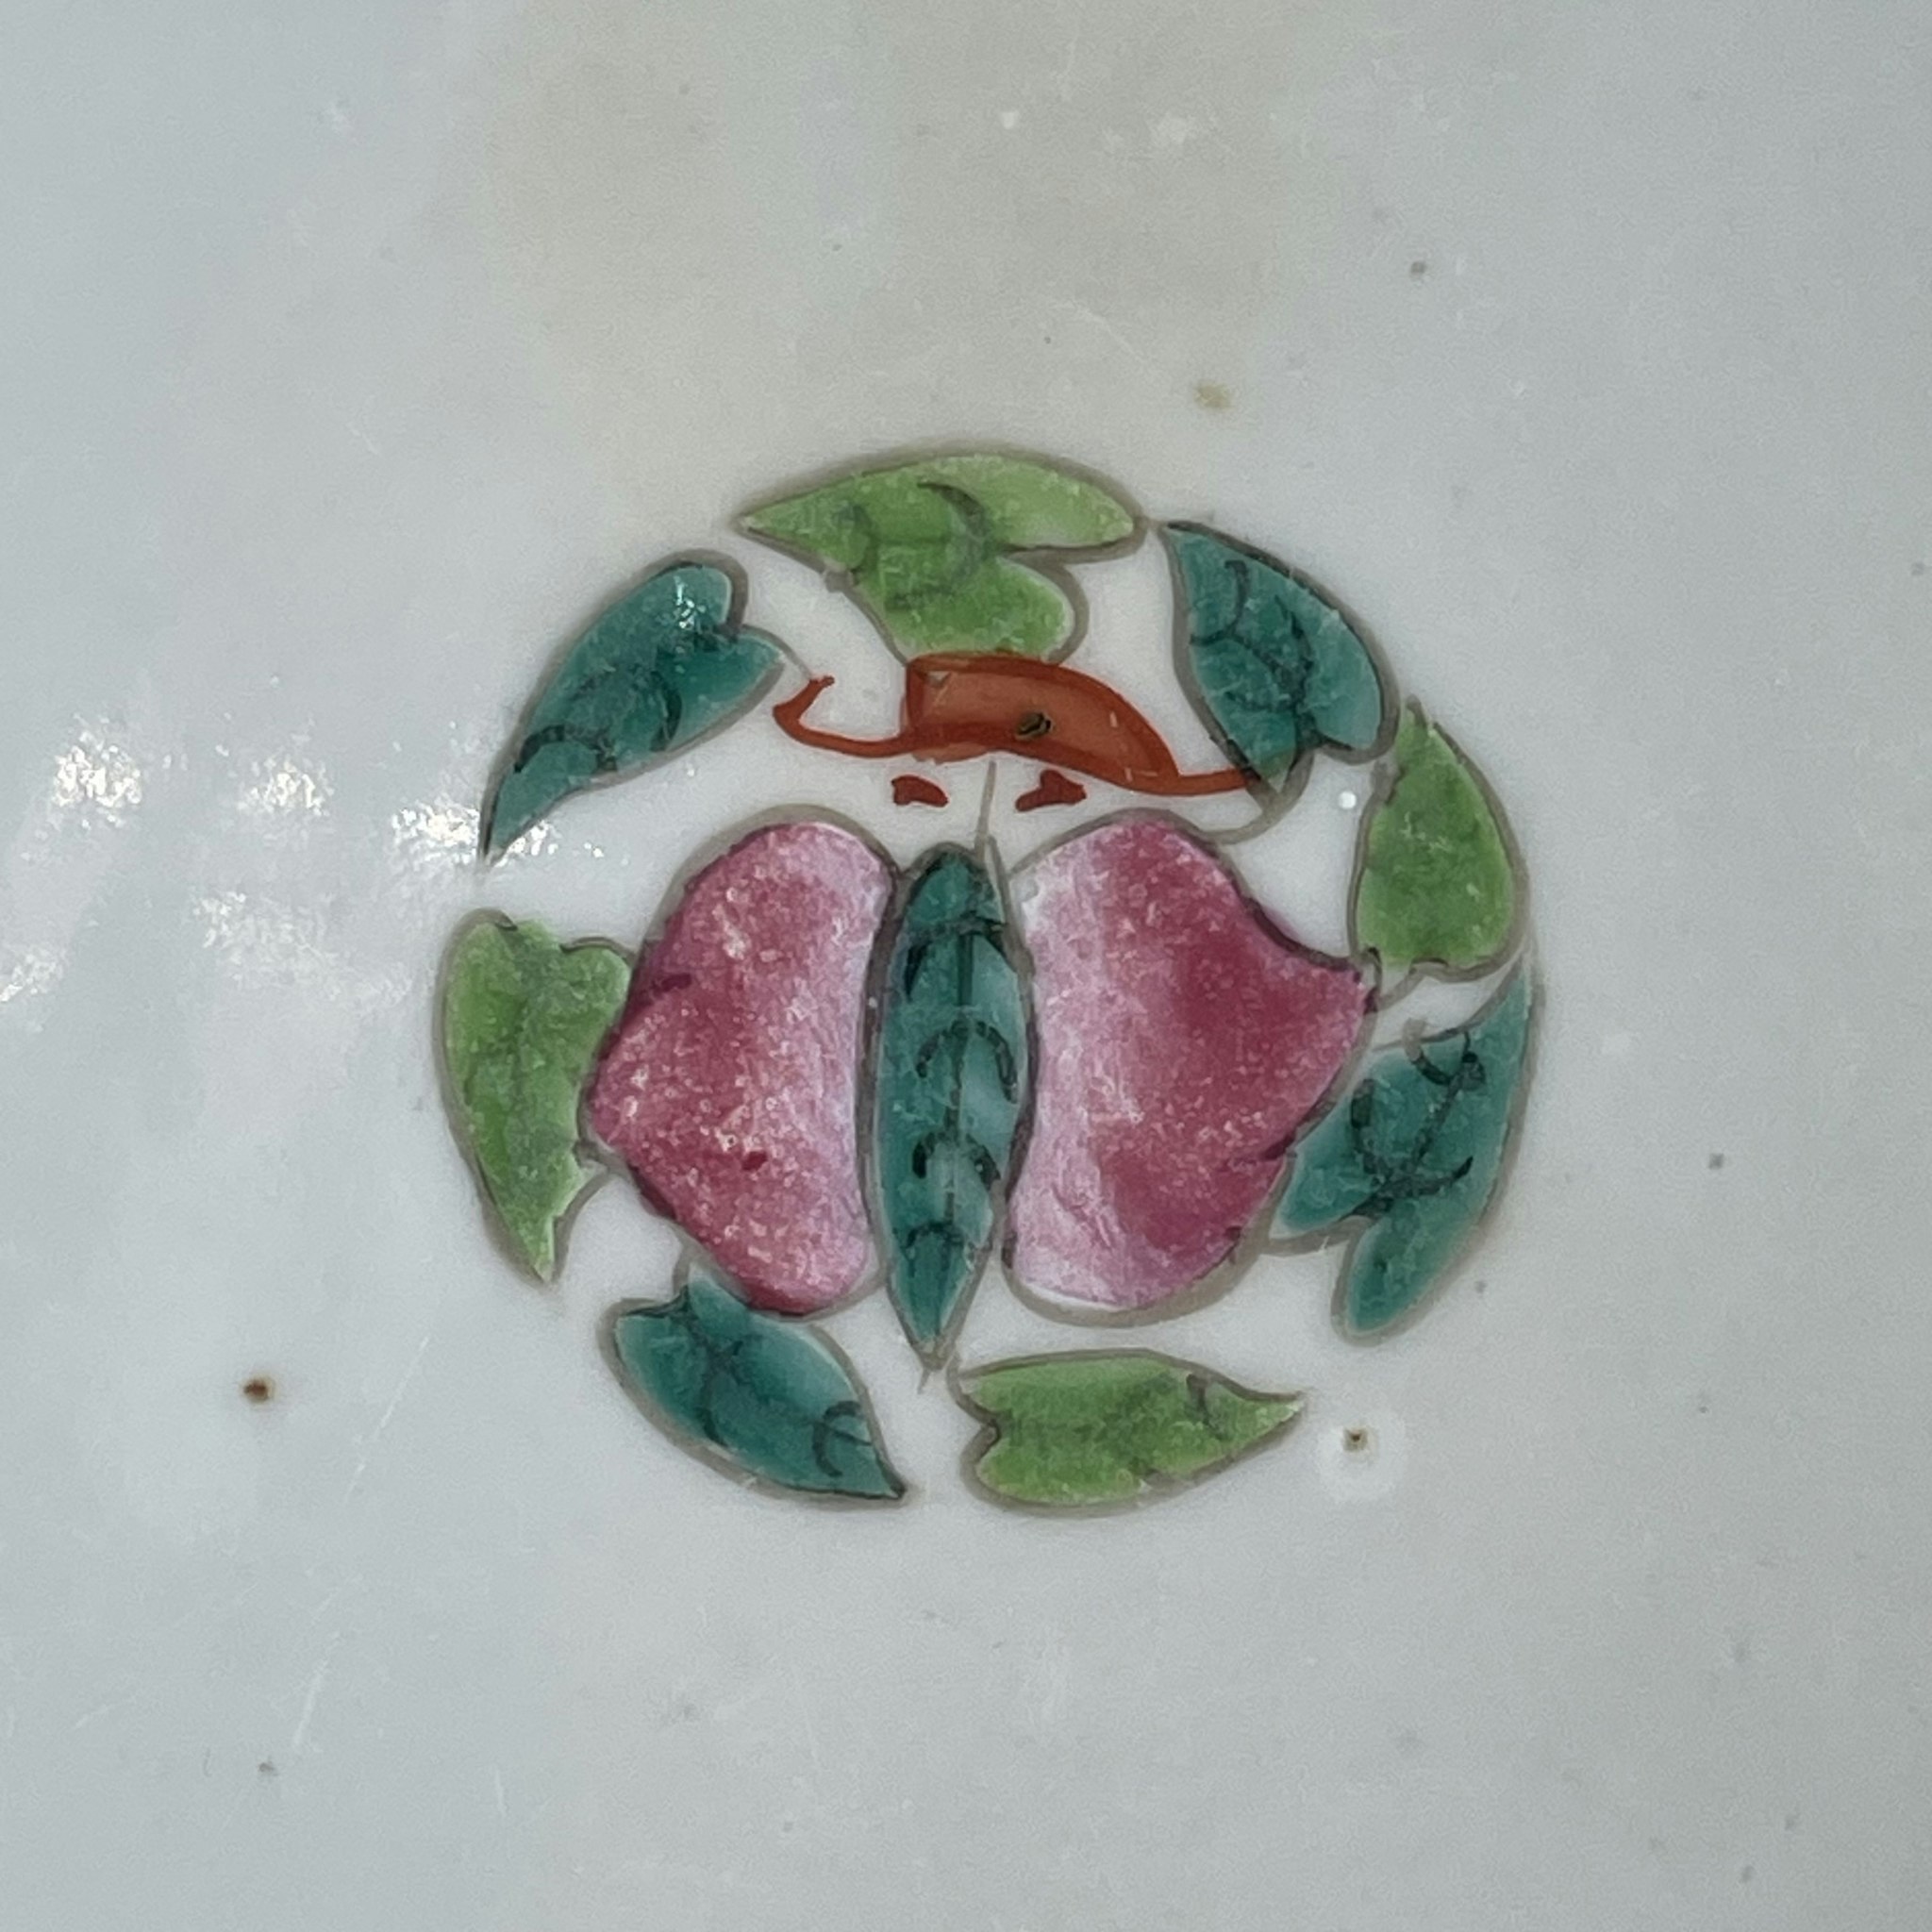 Chinese Antique Porcelain bowl with 4 seasons flowers late Qing Dynasty #1652